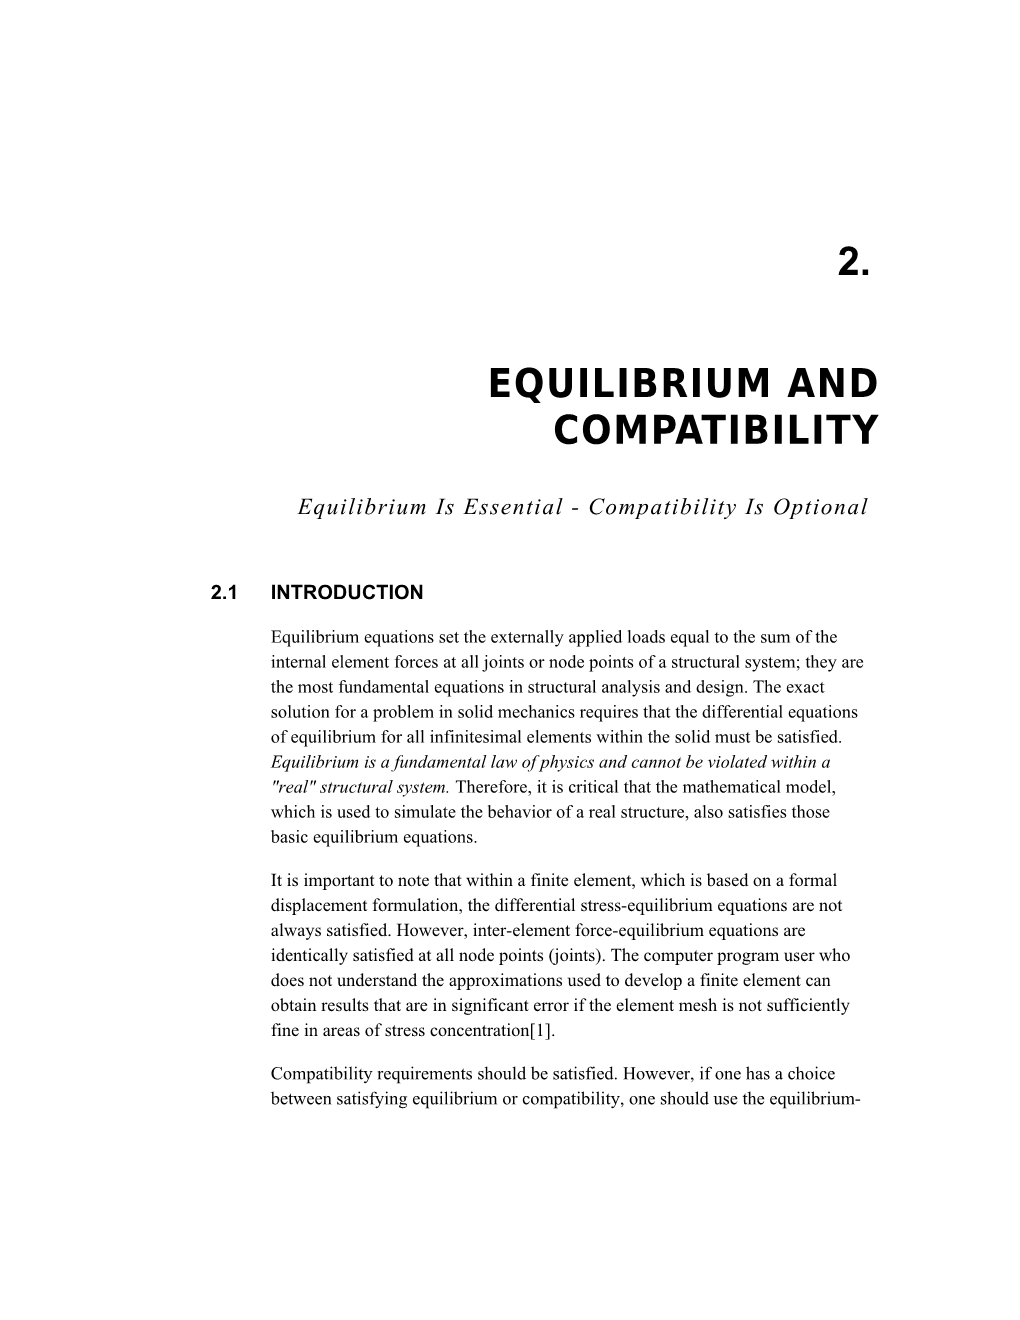 Equilibrium and Compatibility